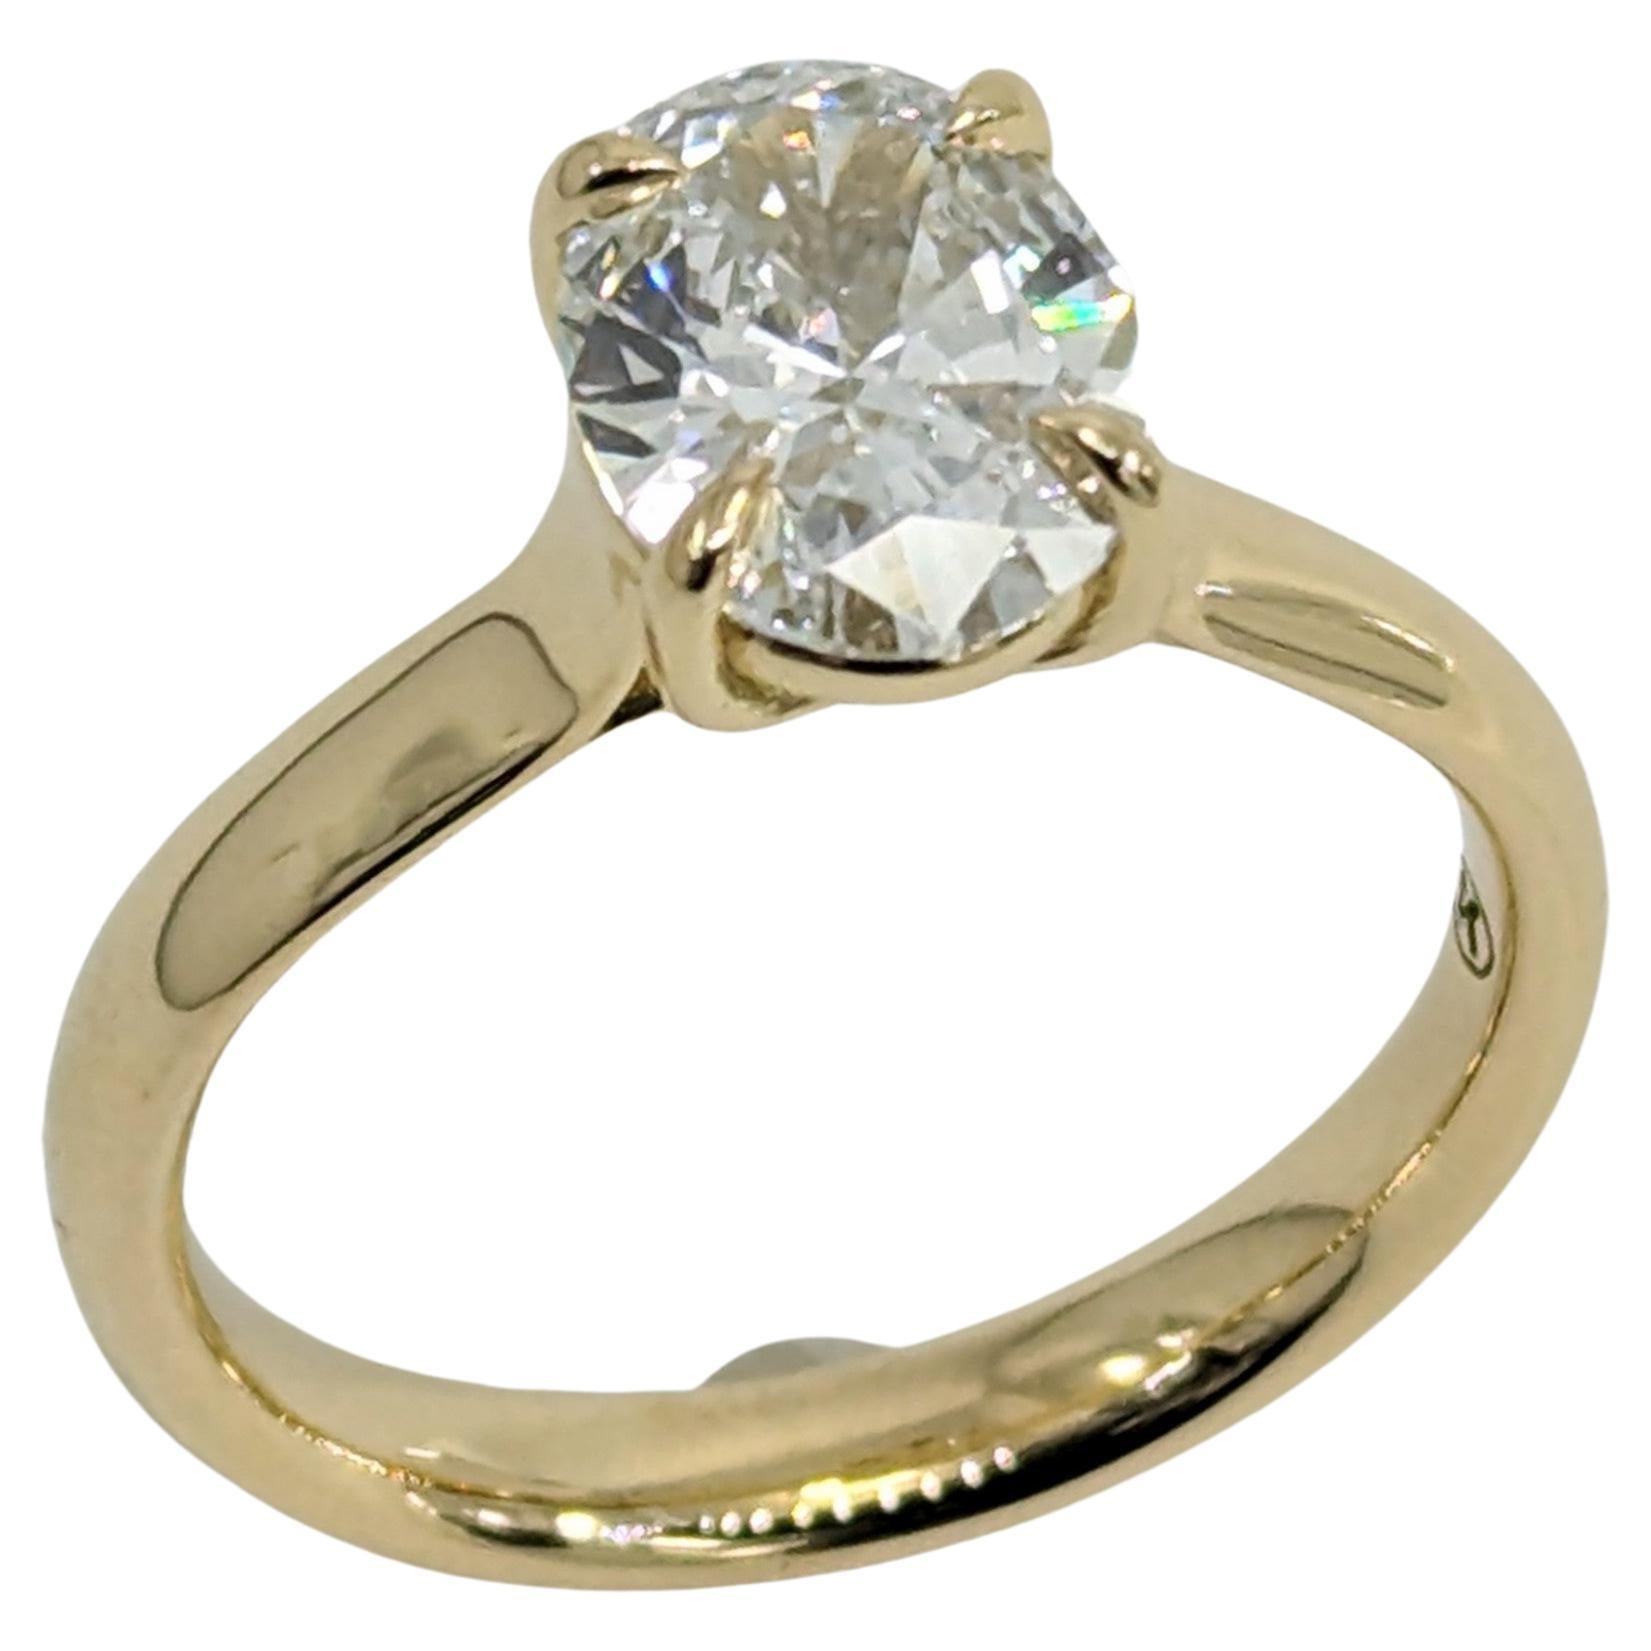 For Sale:  GIA 1.51 Certified Diamond  Engagement Ring in 18 Karat Gold